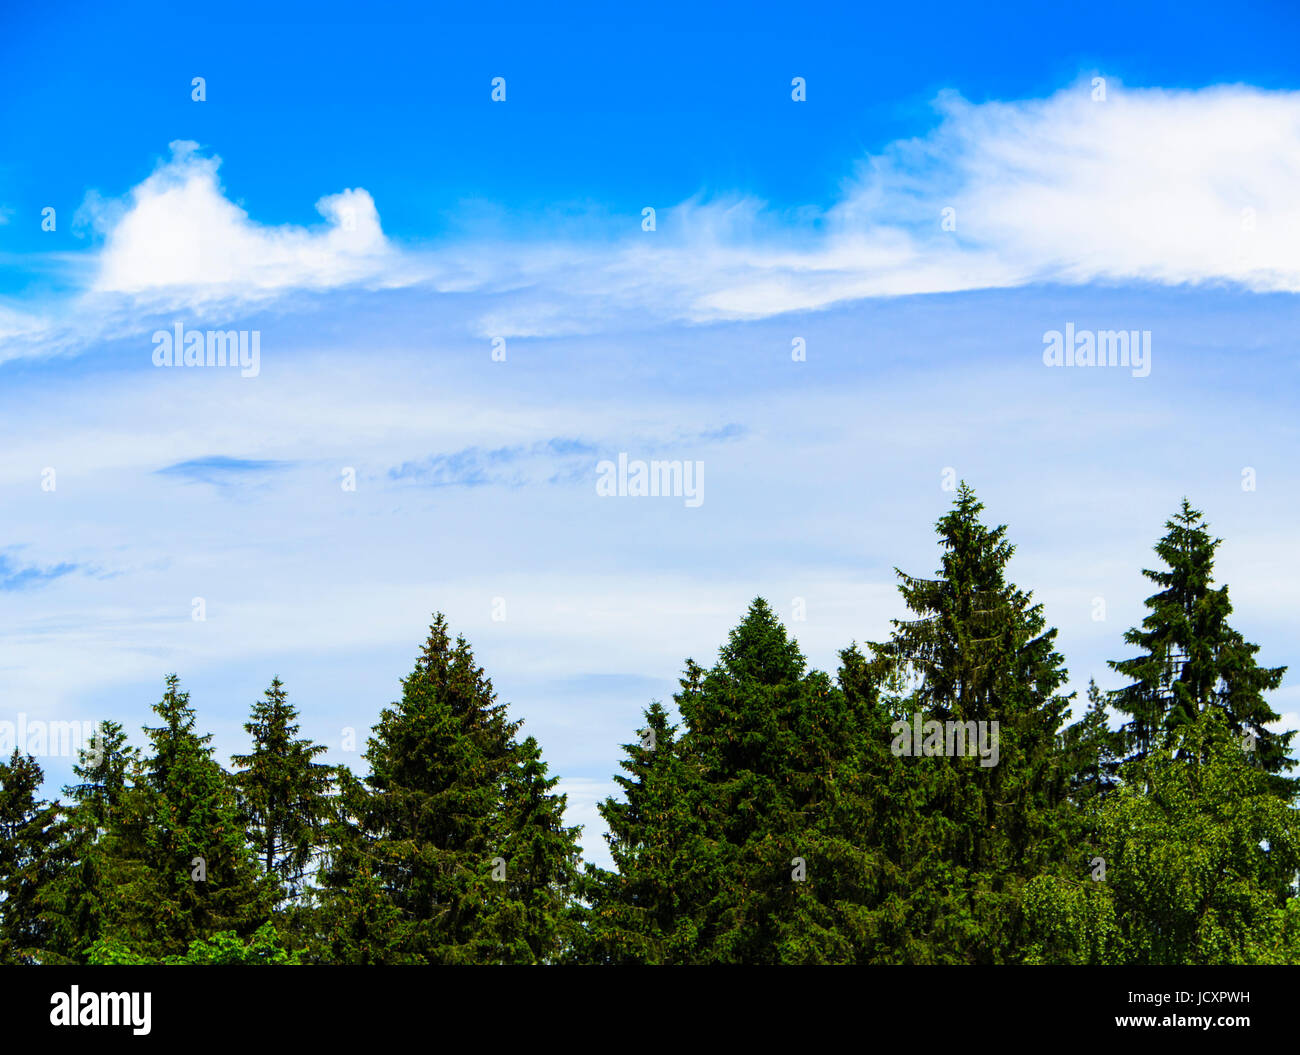 Spruce trees in front of a blue sky with cloud for background Stock Photo